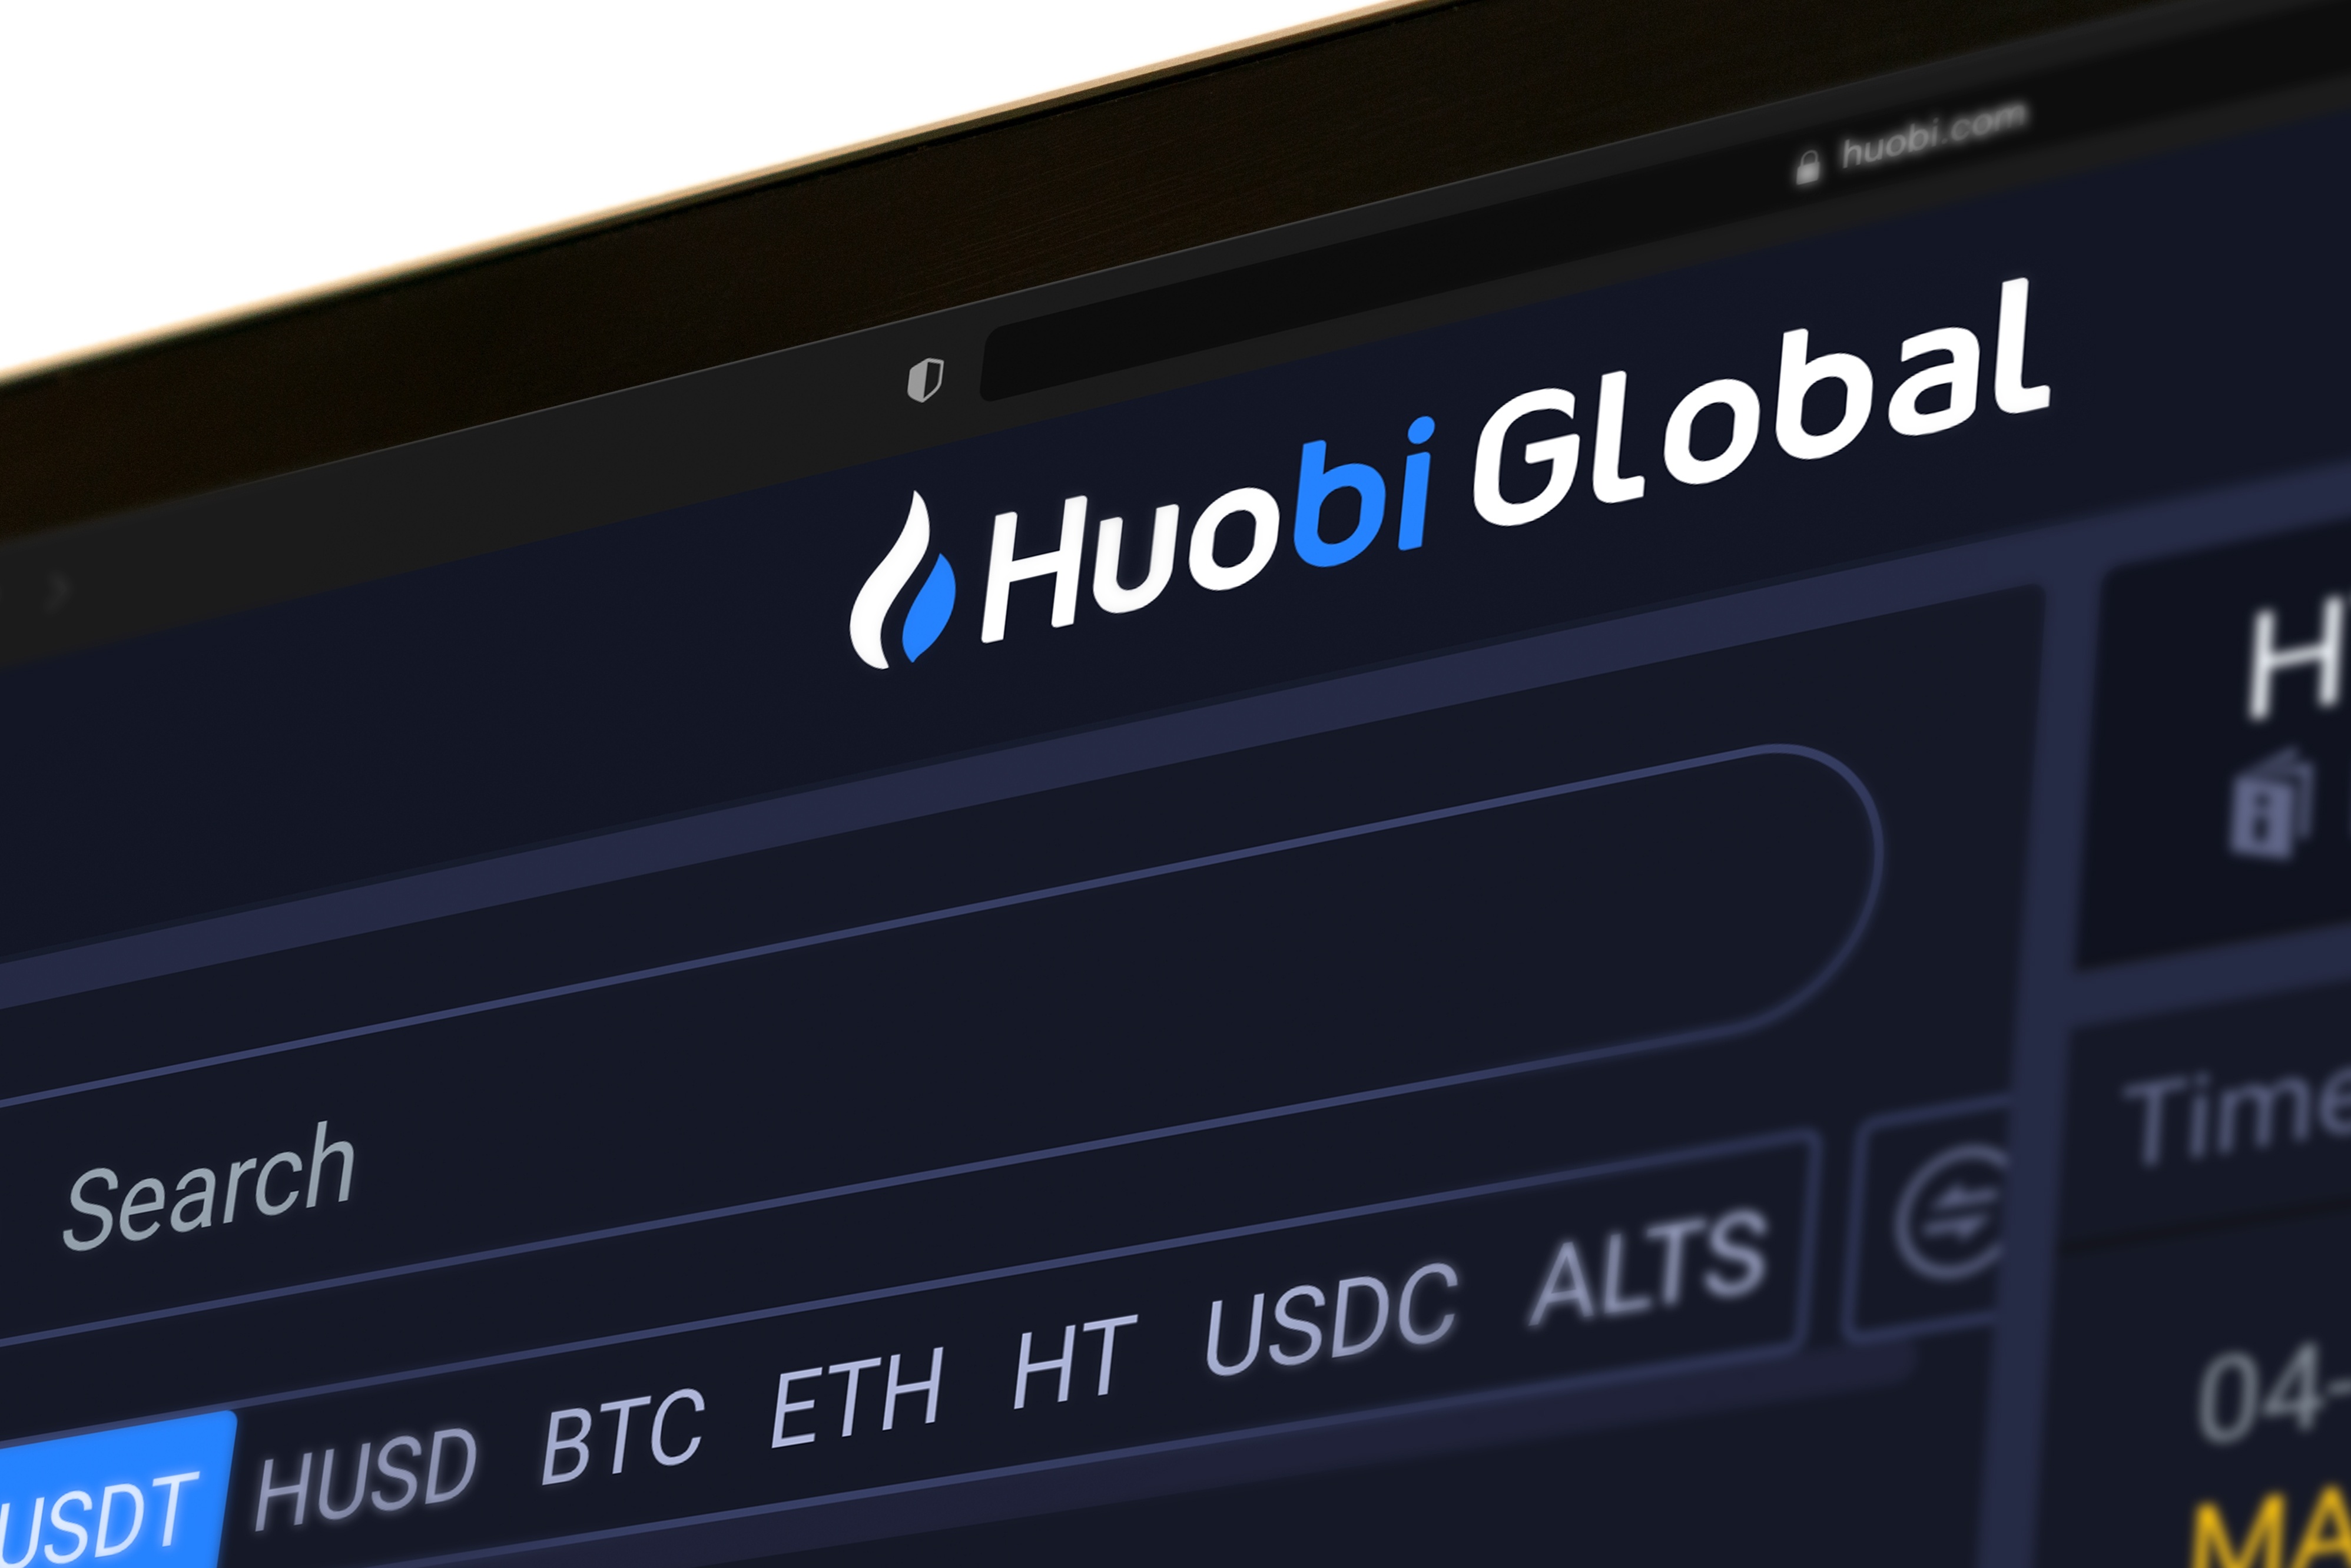 Ex-Huobi manager to be prosecuted for illegal trading